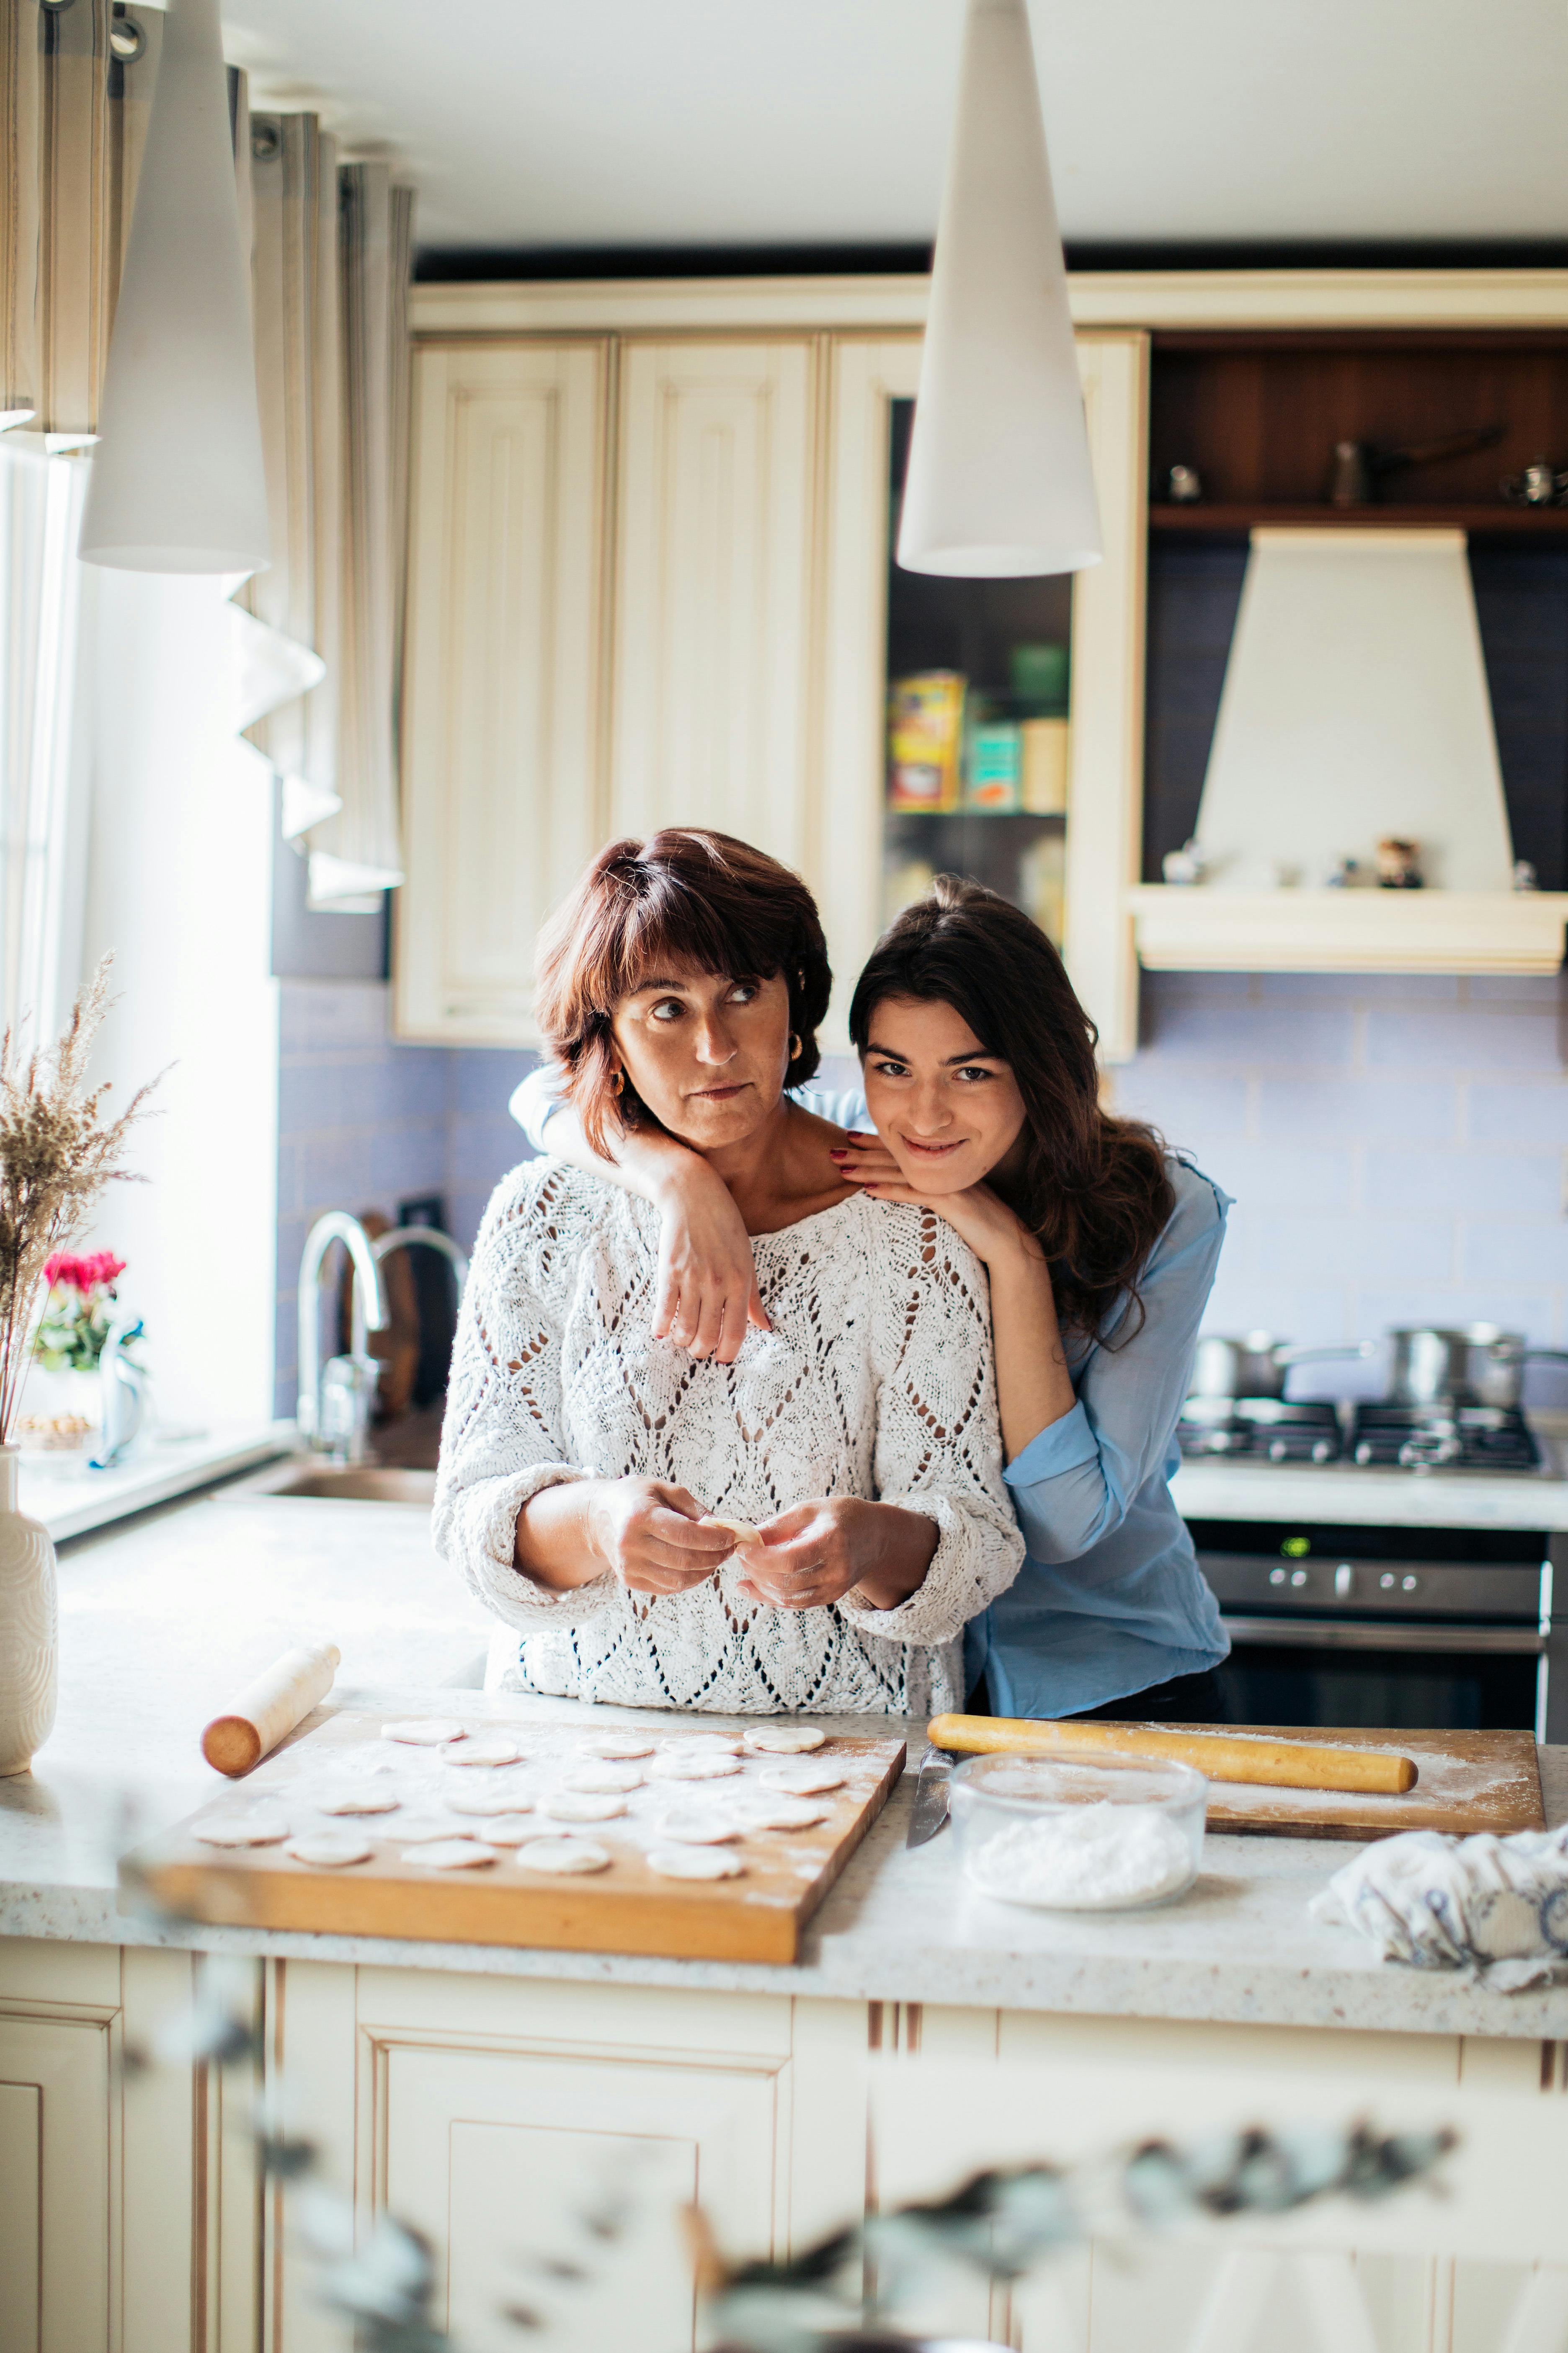 A mother and daughter bonding while baking | Source: Pexels